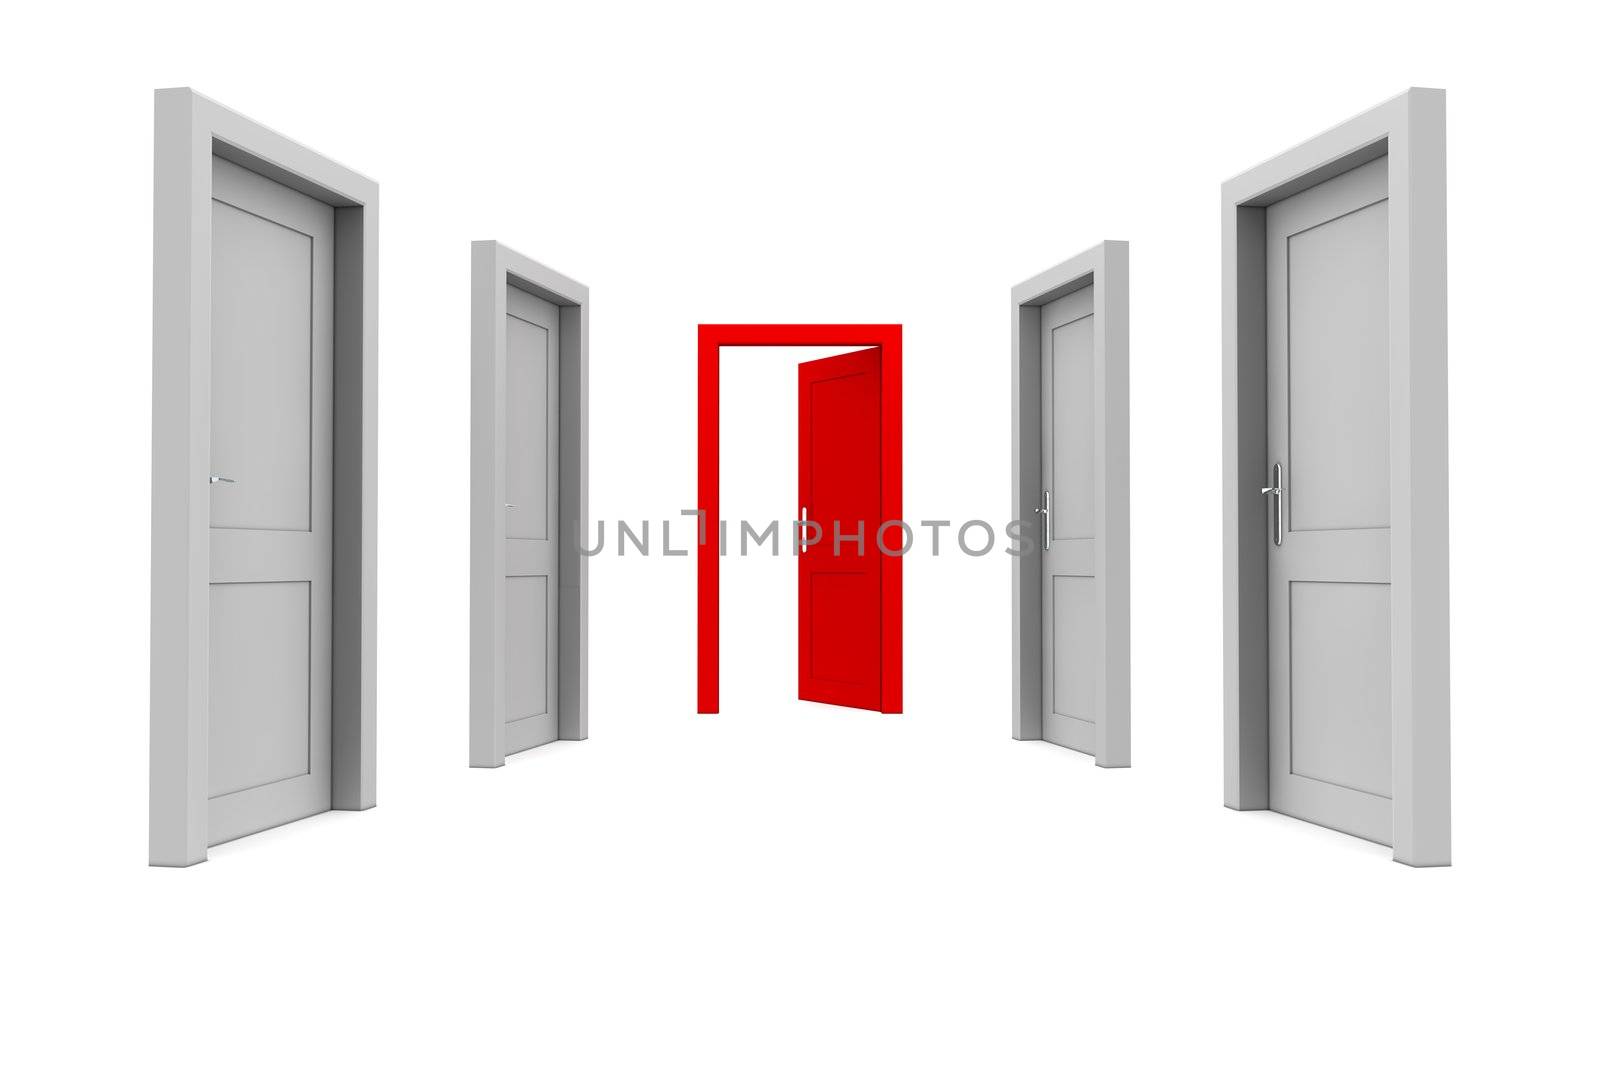 abstract hallway with gray doors - one red door open at the end of the corridor